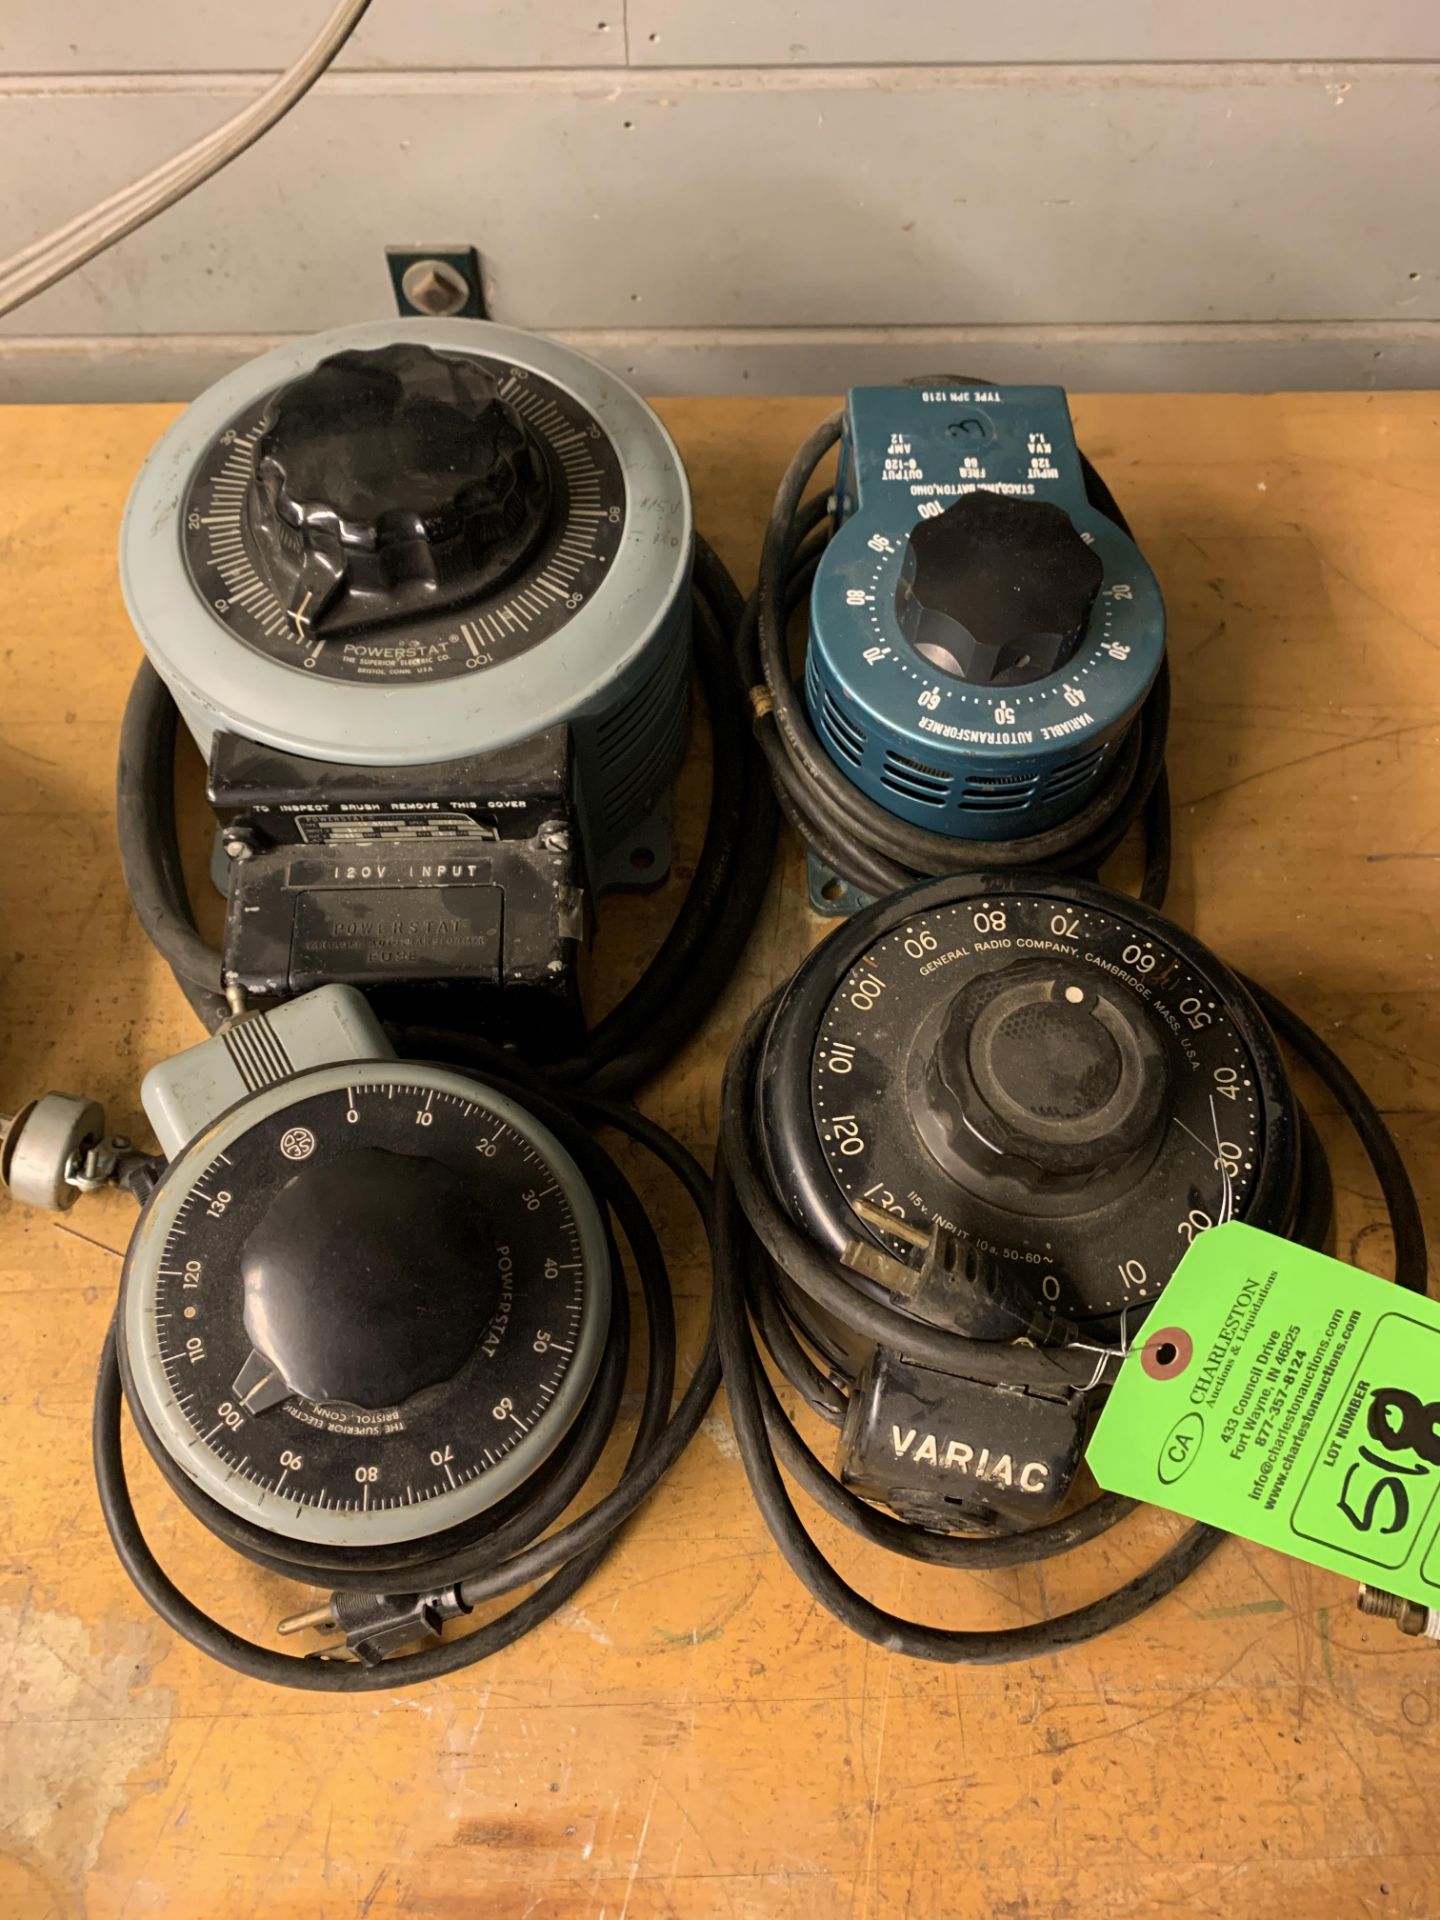 LOT OF (4) VARIOUS VARIABLE CONTROLLERS -- 1901 NOBLE DR EAST CLEVELAND OHIO 44112